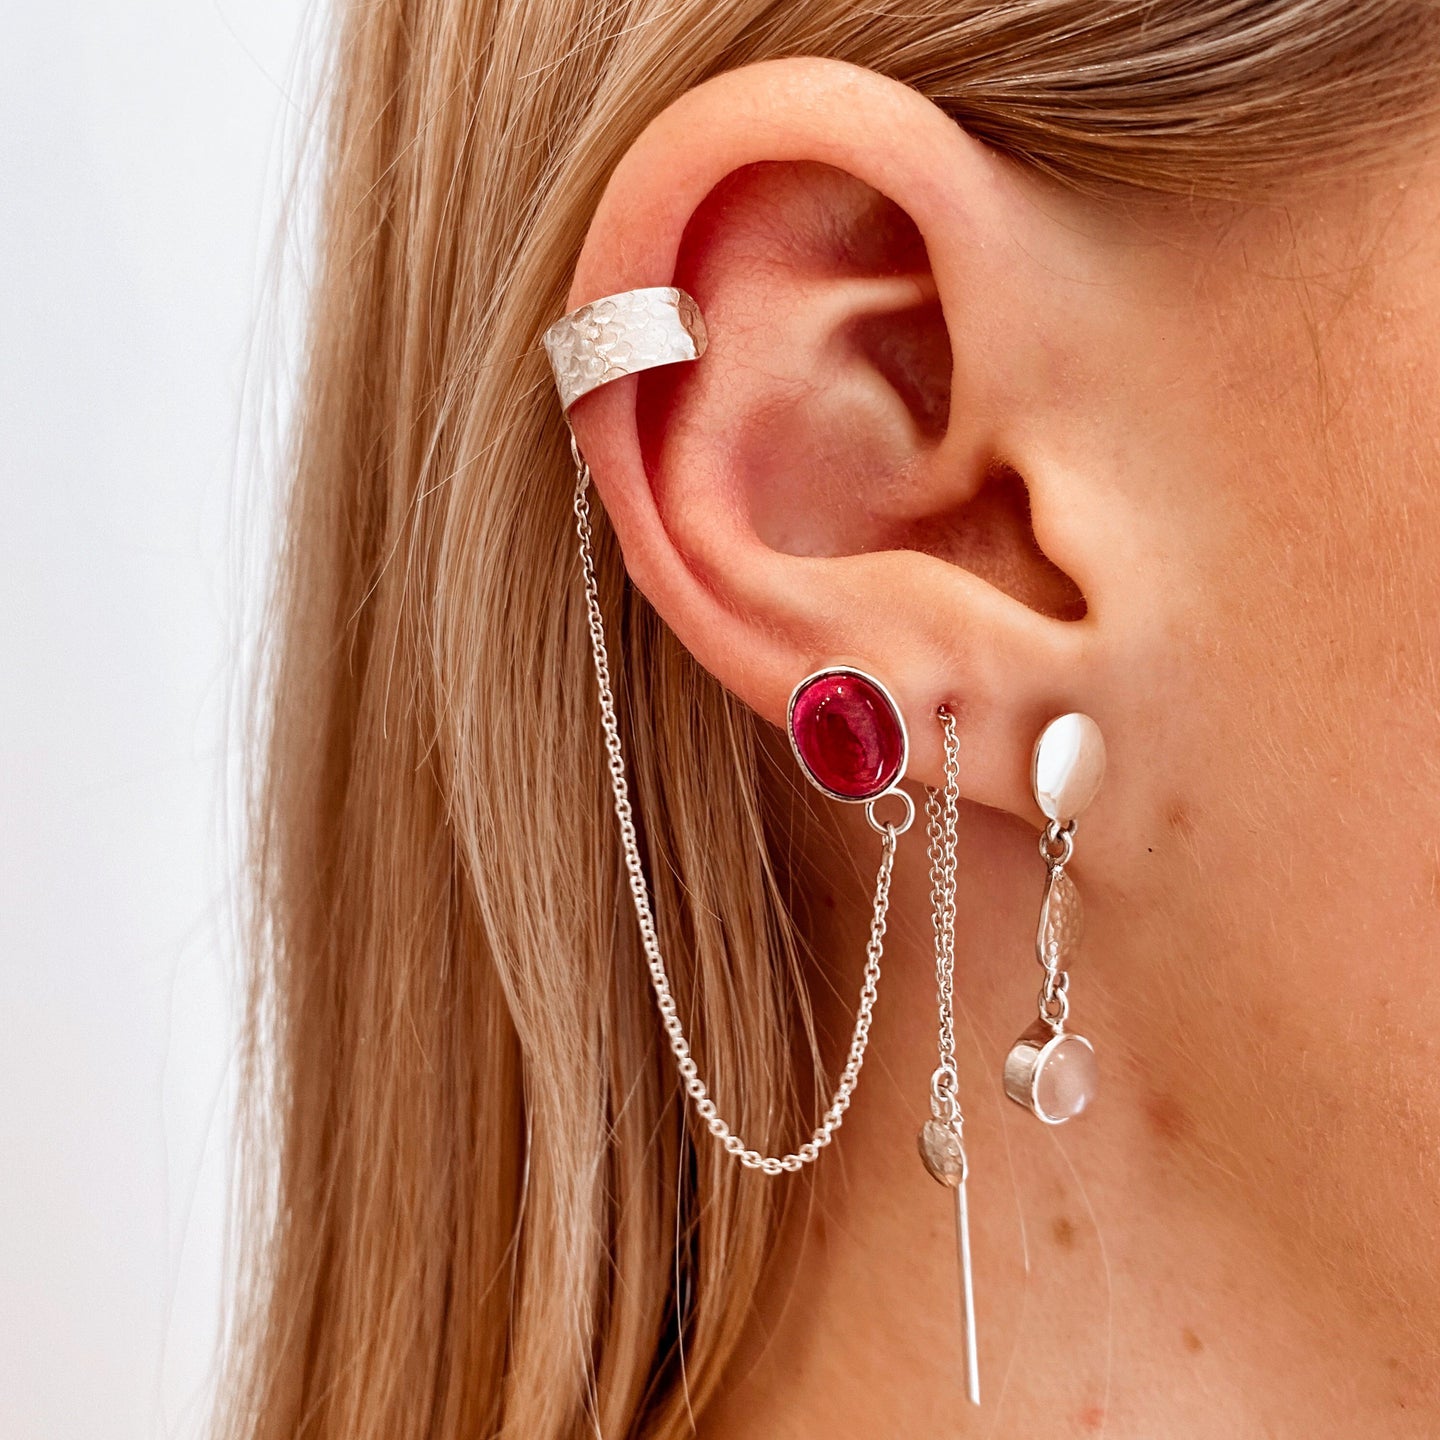 Ruby Stud Earrings with Silver Cuff & Chain | Sterling silver 925